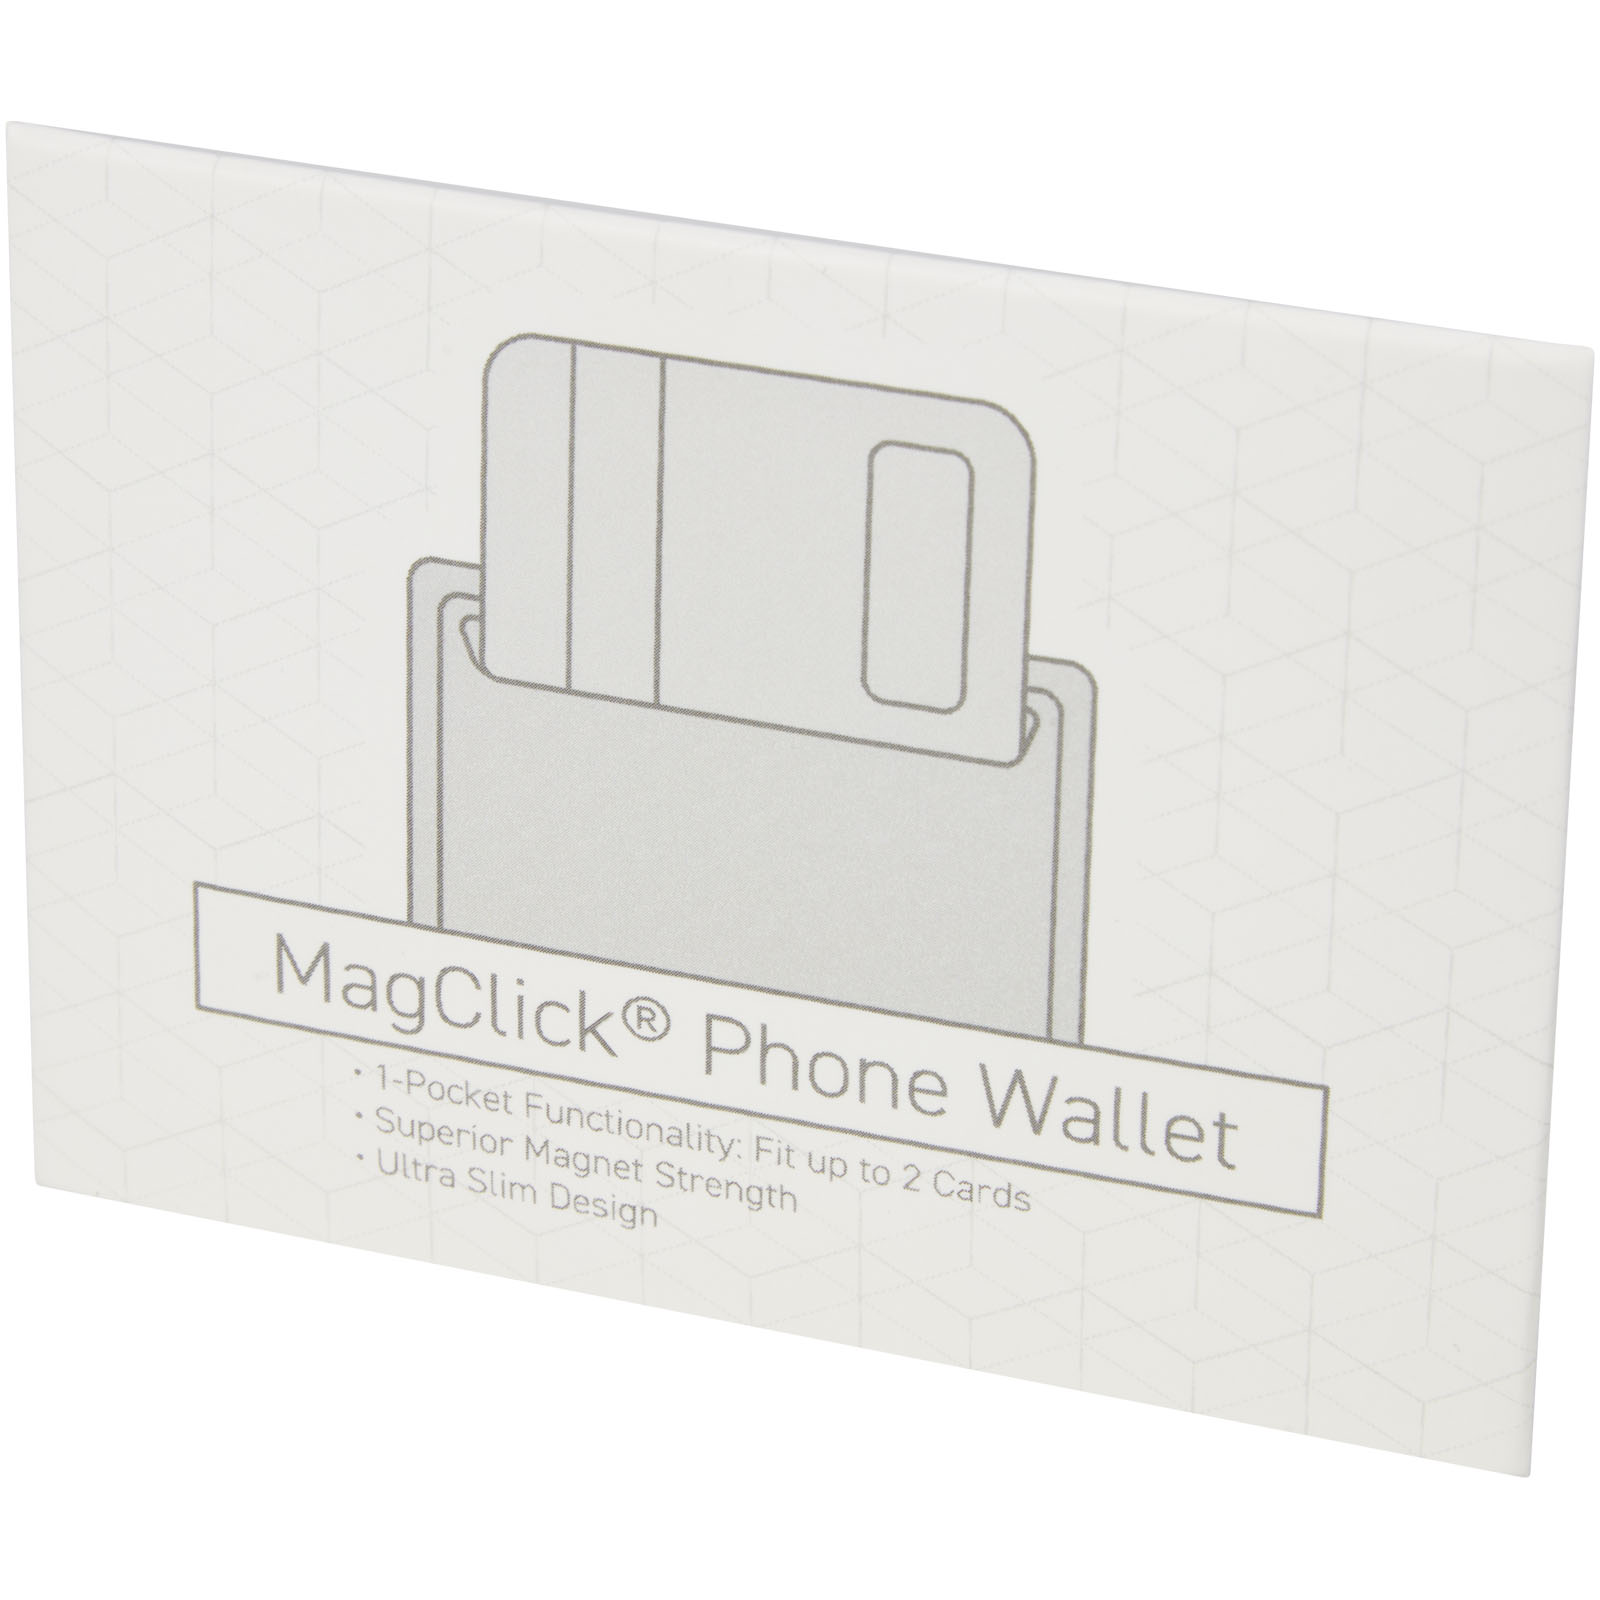 Advertising Telephone & Tablet Accessories - Magclick phone wallet - 1